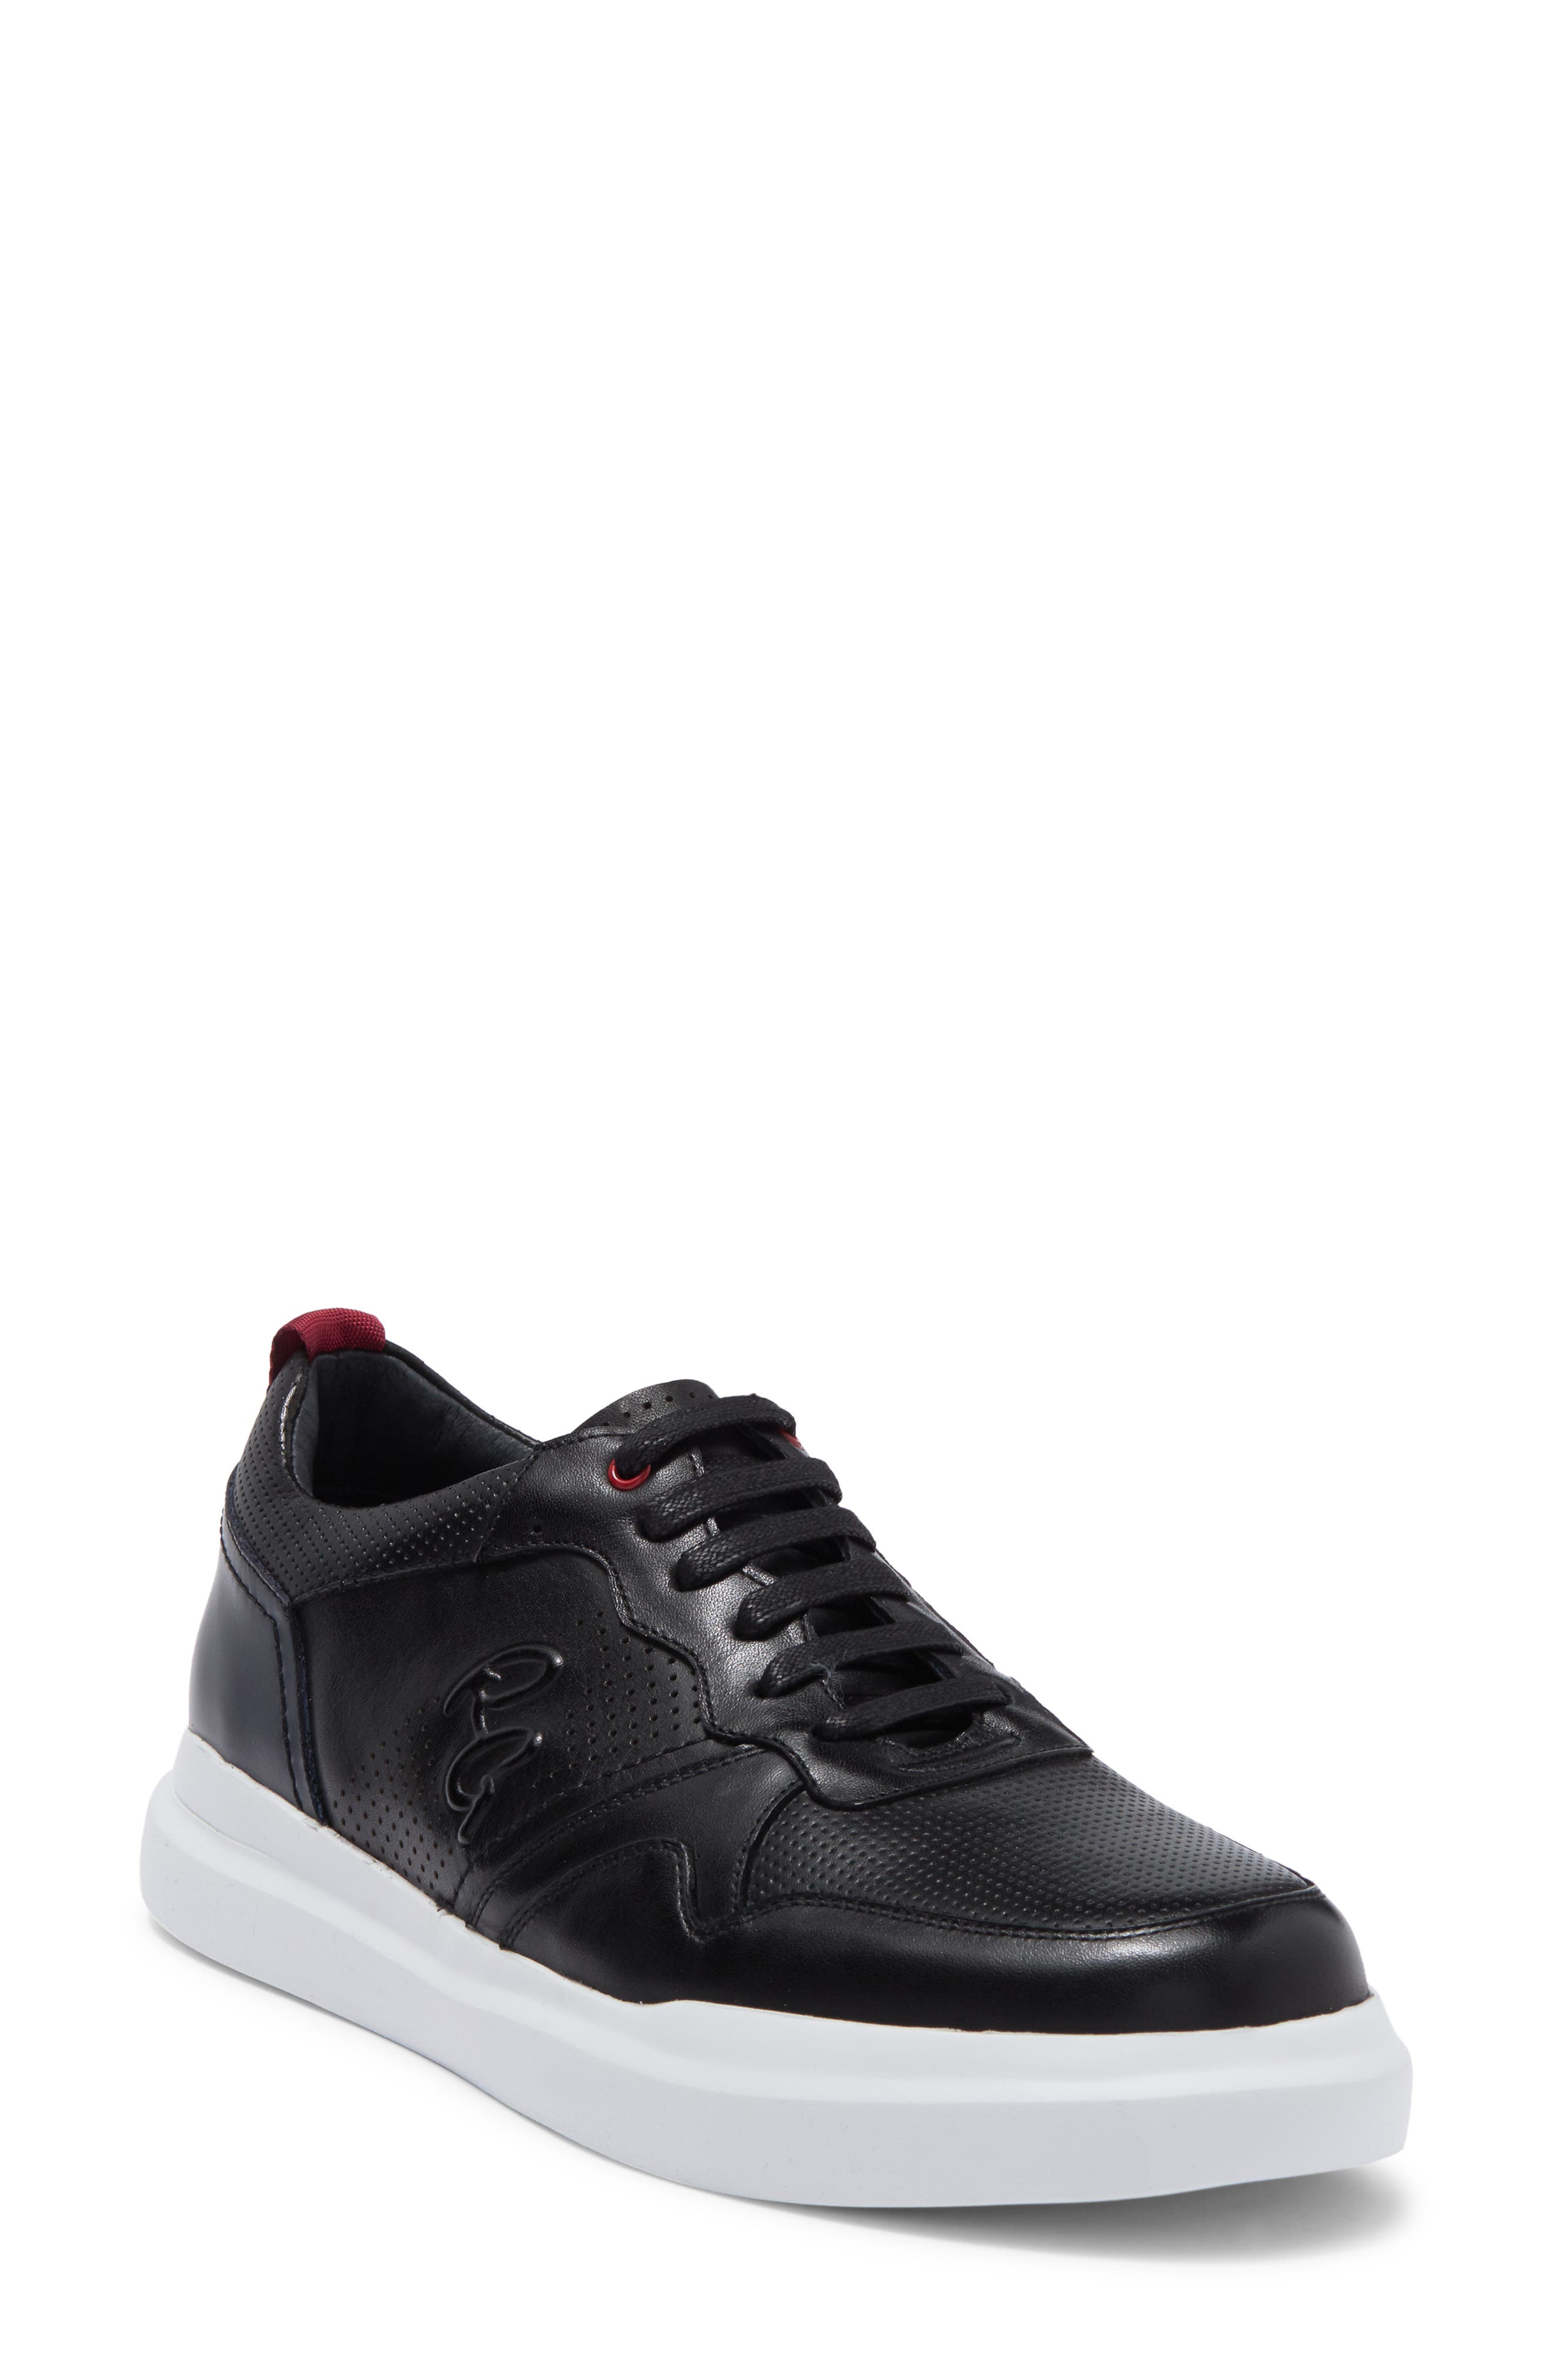 Robert Graham Cheval Lace-up Sneaker In Black